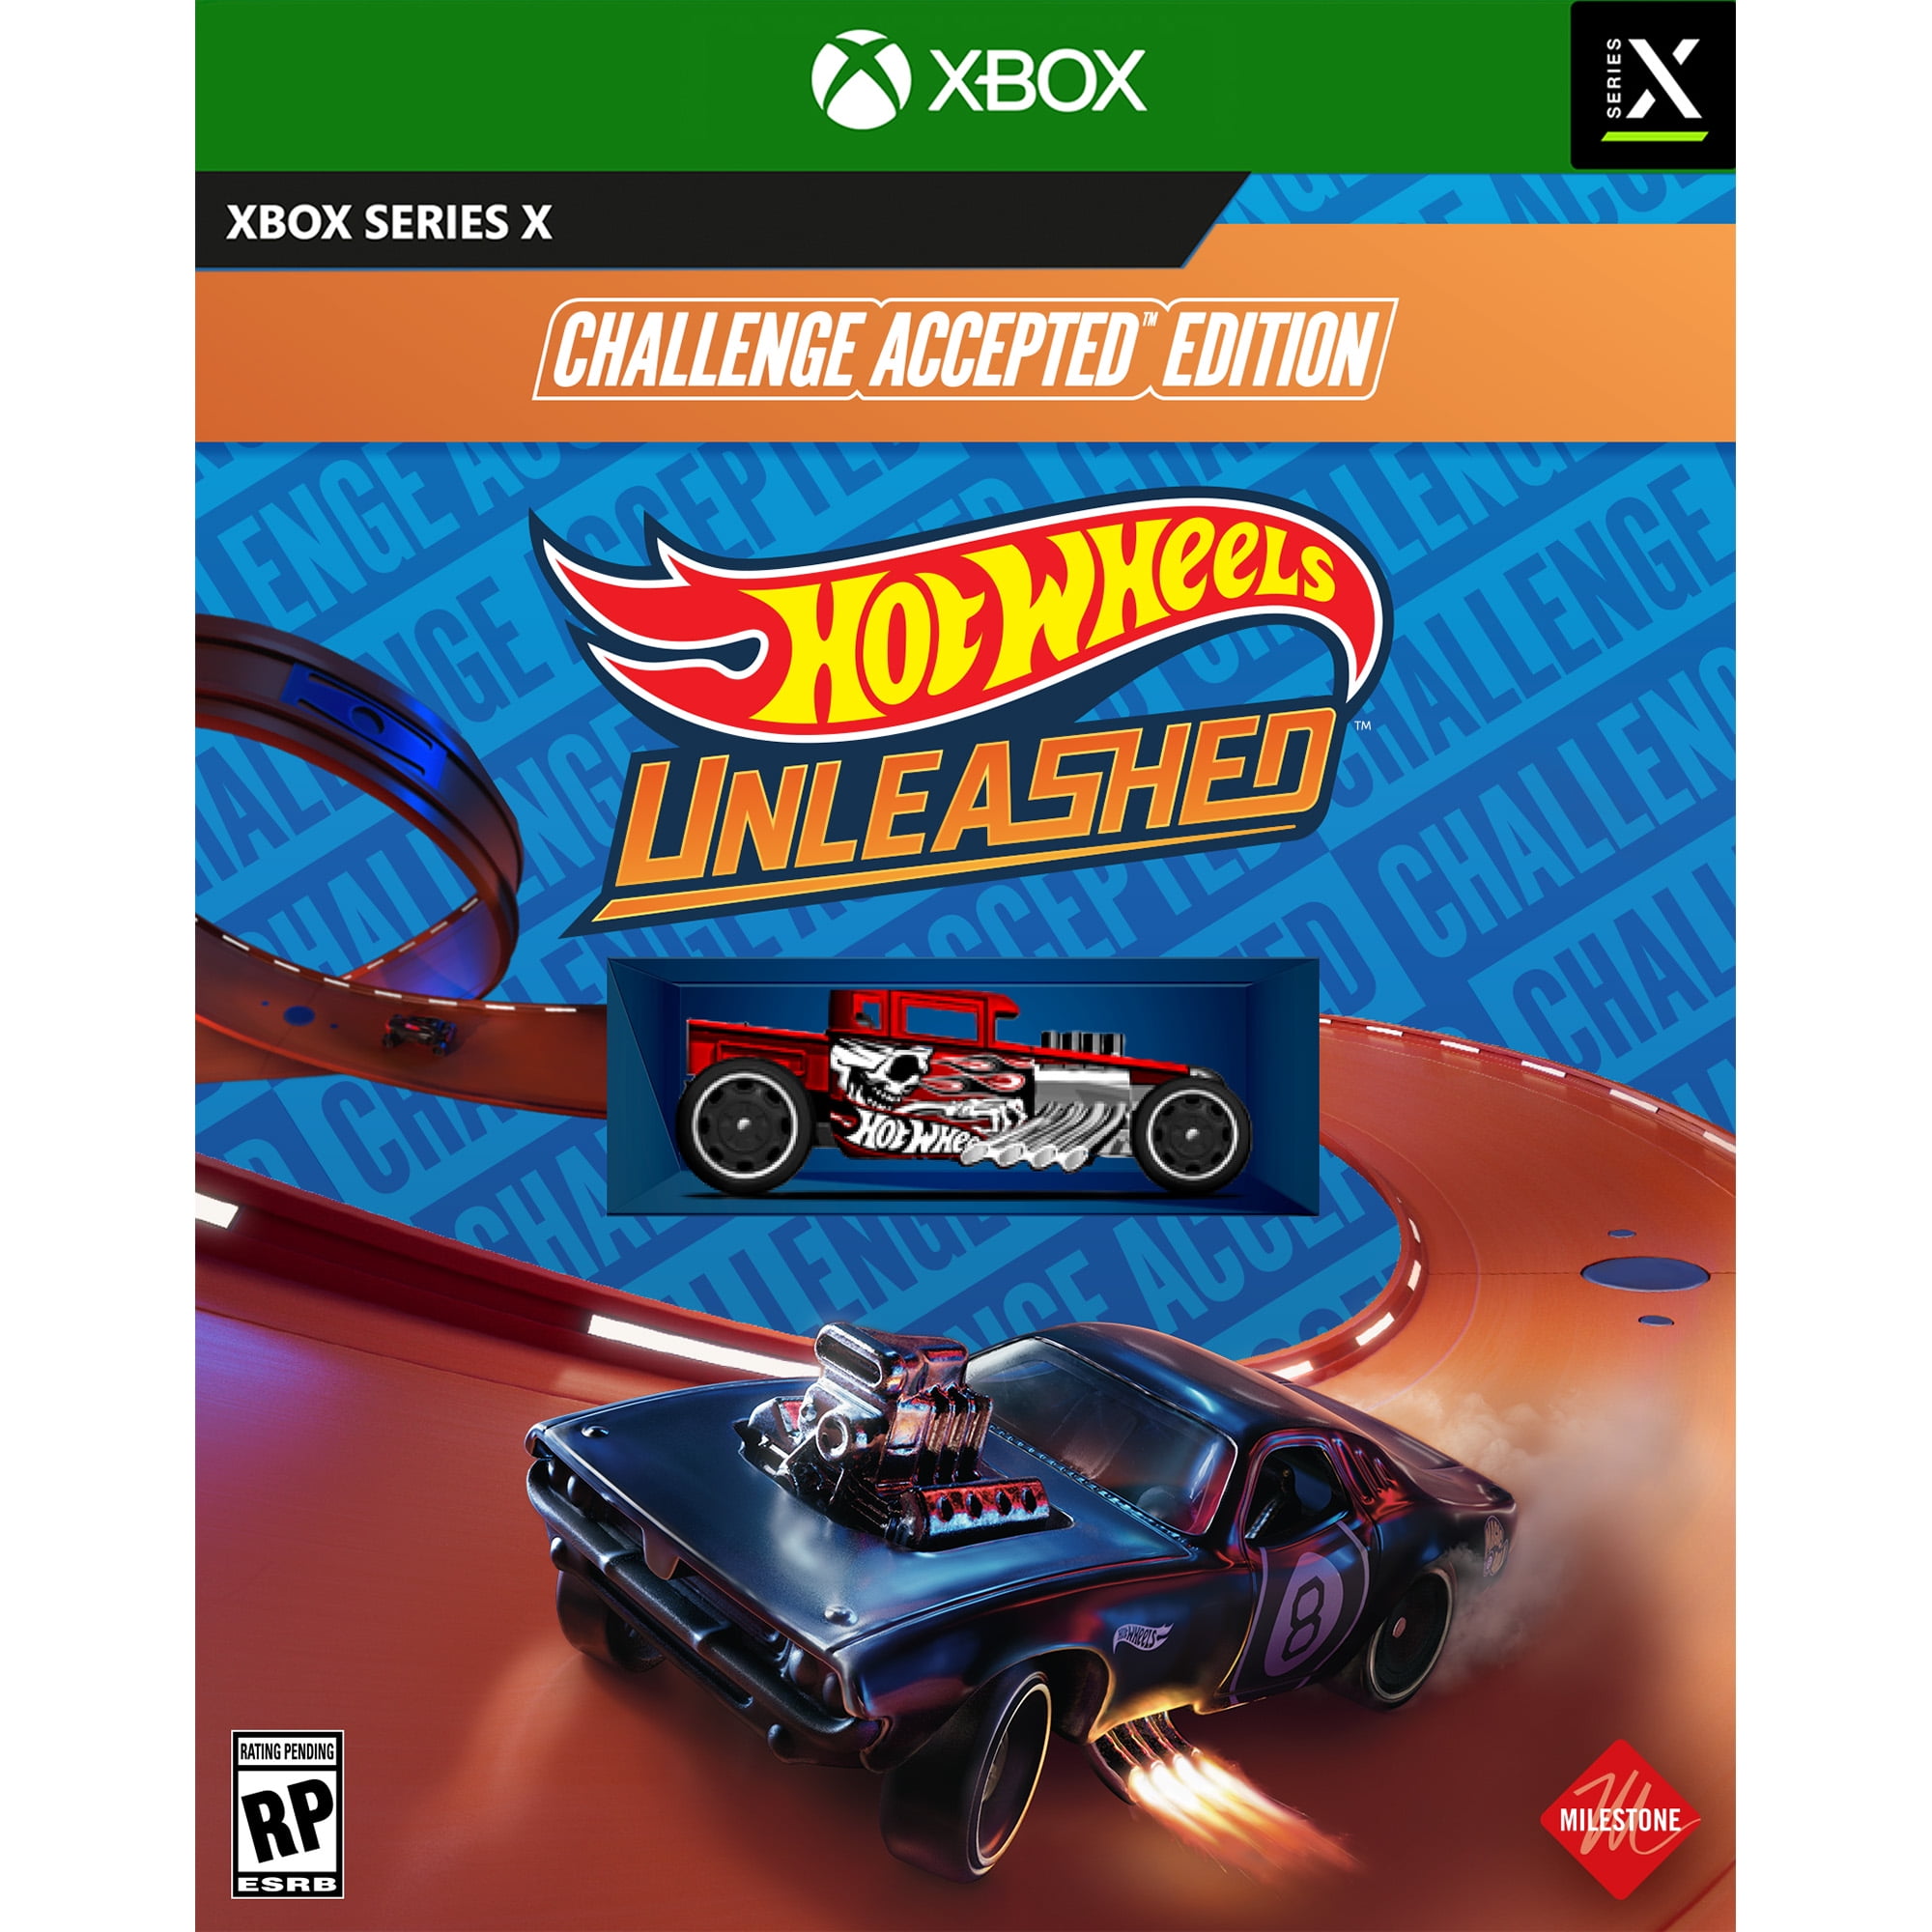 Hot Wheels Unleashed Challenge Accepted Edition, Koch Media, Xbox Series X,  [Physical], 816819019078, Walmart Exclusive